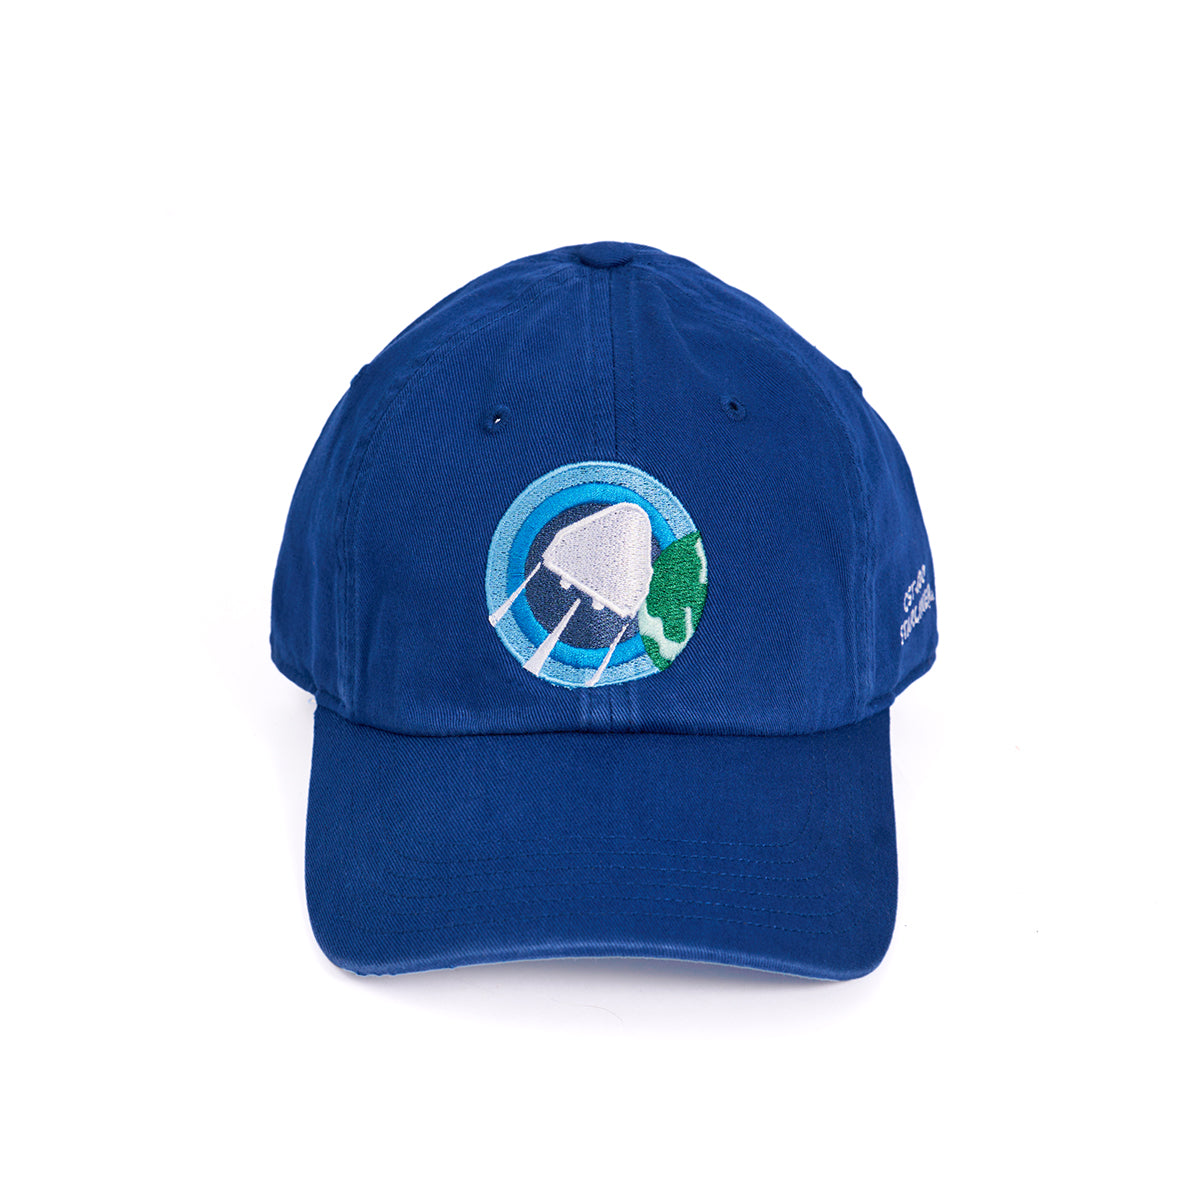 Skyward hat, featuring the iconic Boeing CST-100 Starliner embroidered in a roundel design on the front.